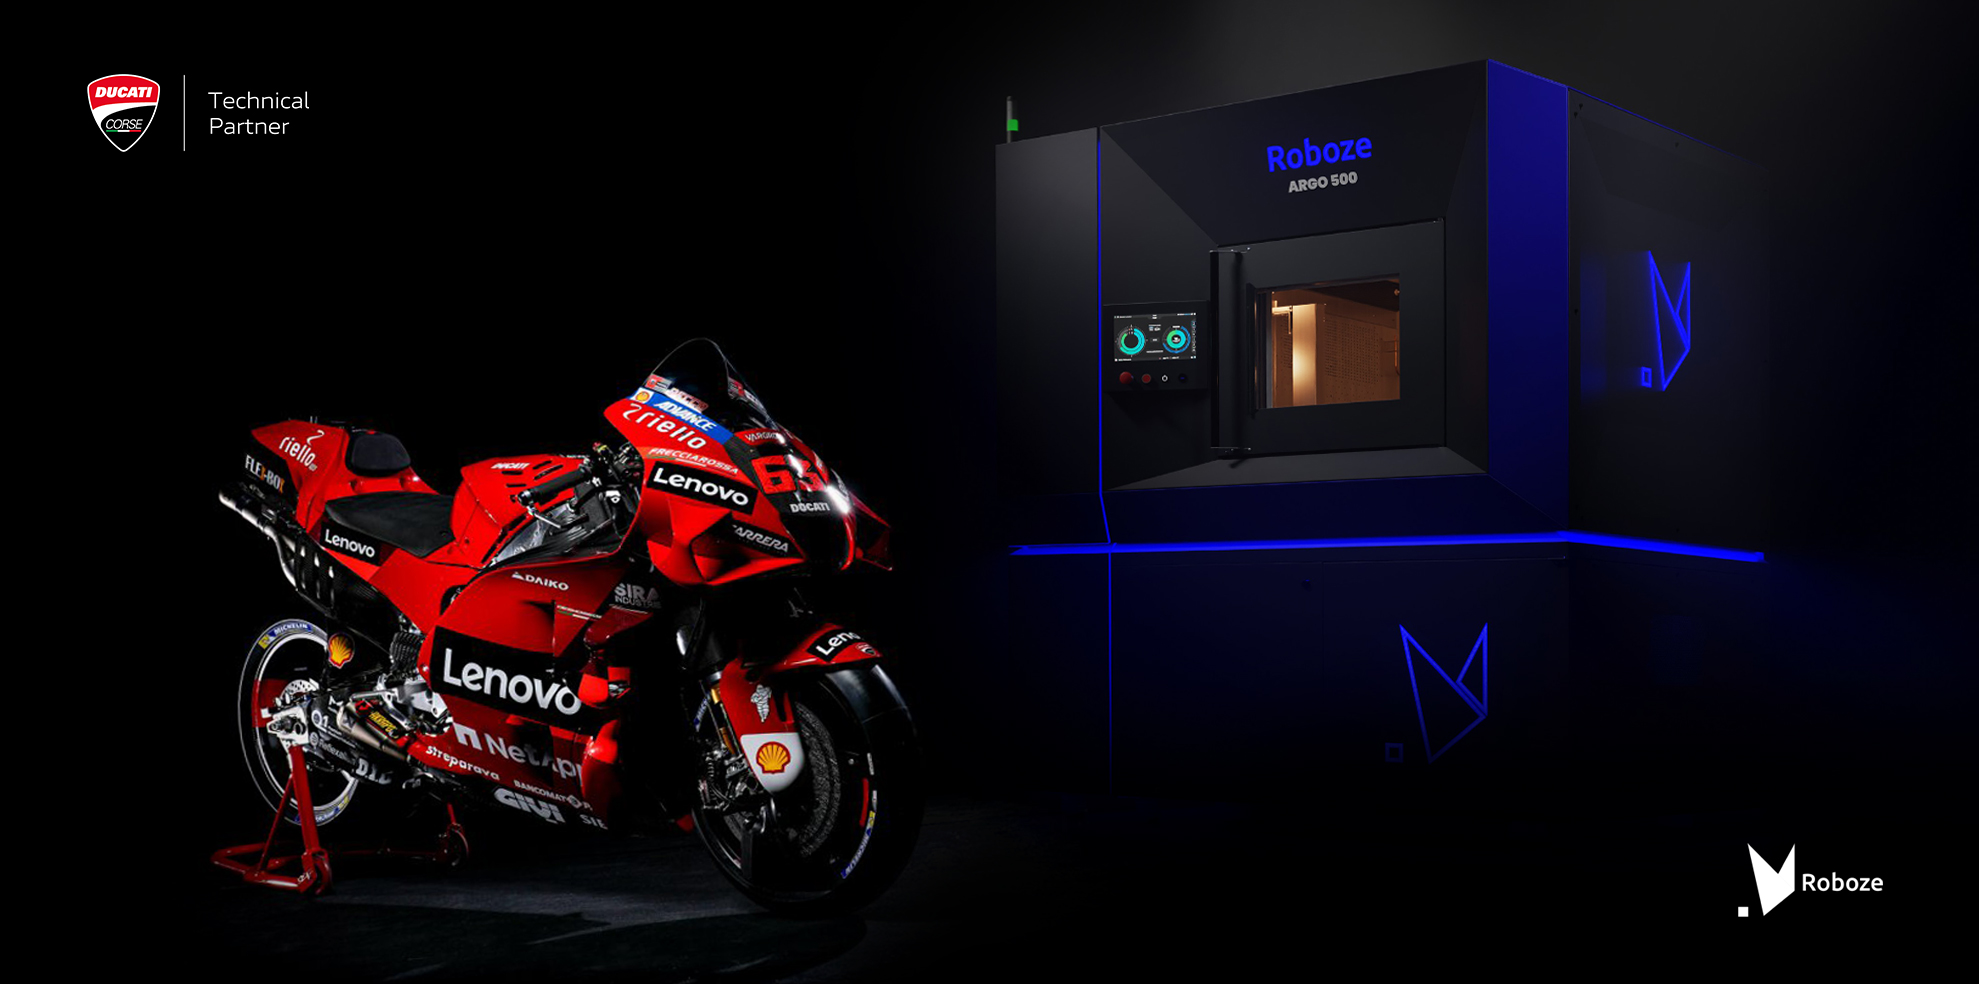 Volkswagen’s Ducati to Use Roboze 3D Printing on Superbikes – 3DPrint.com